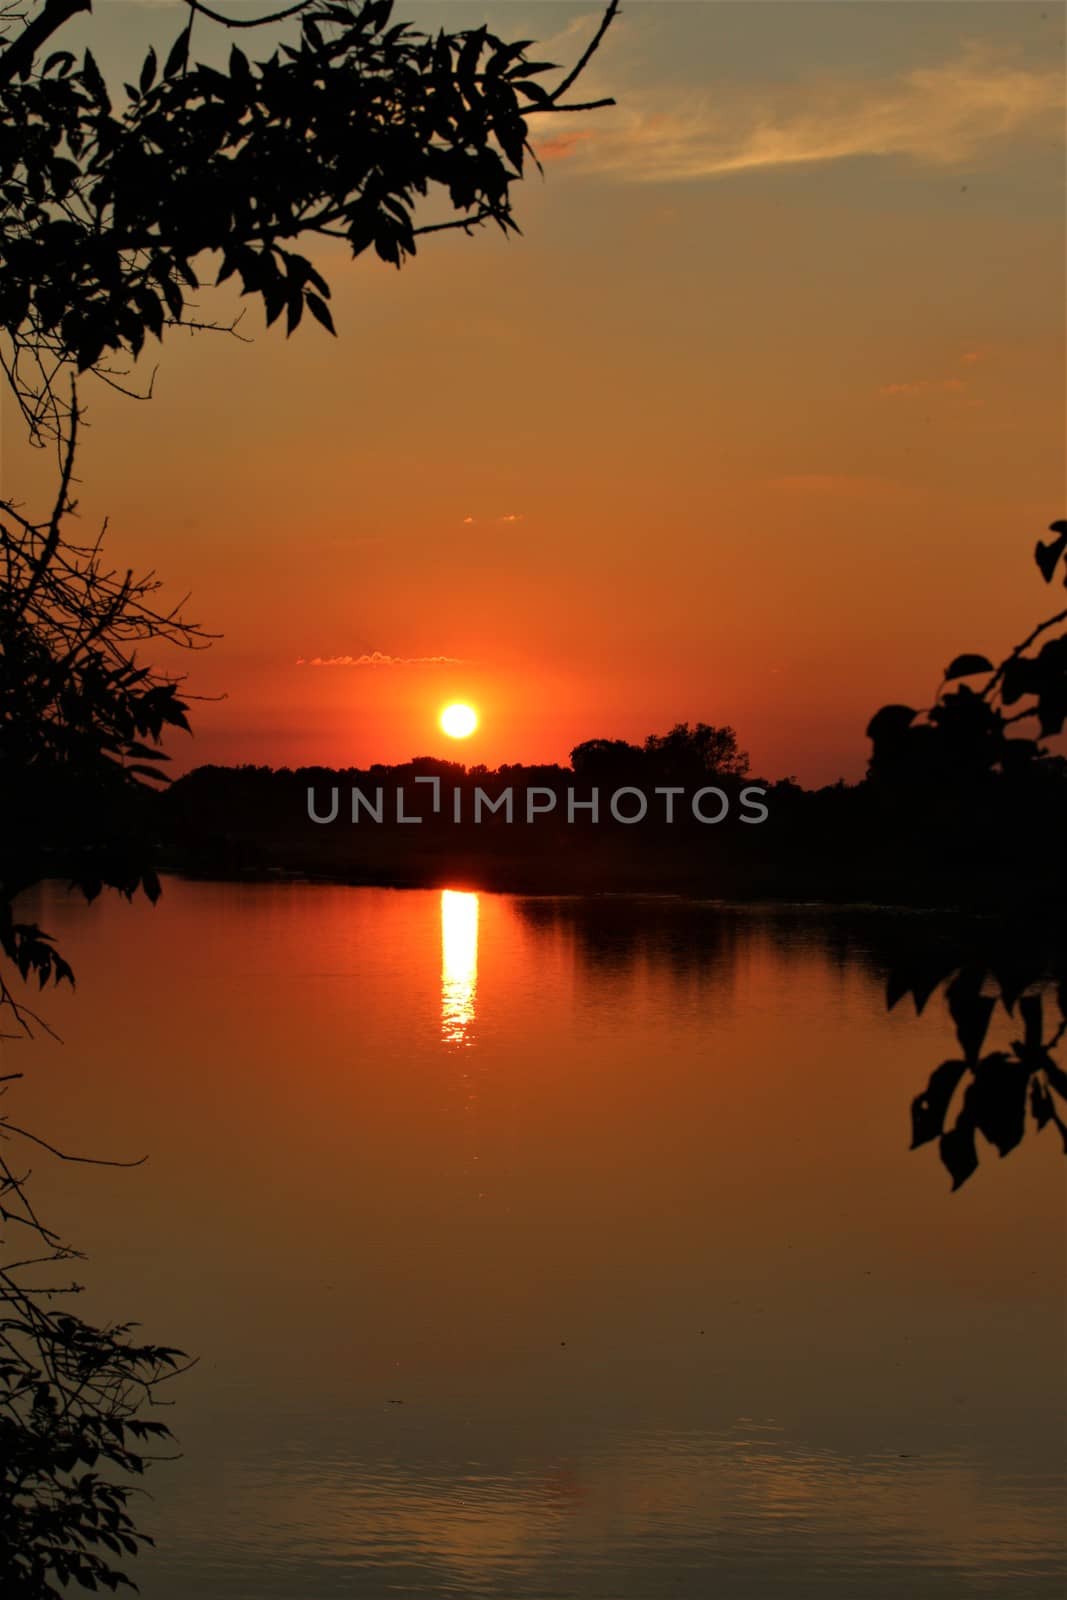 A great sunset with a lake view and bushes in the foreground